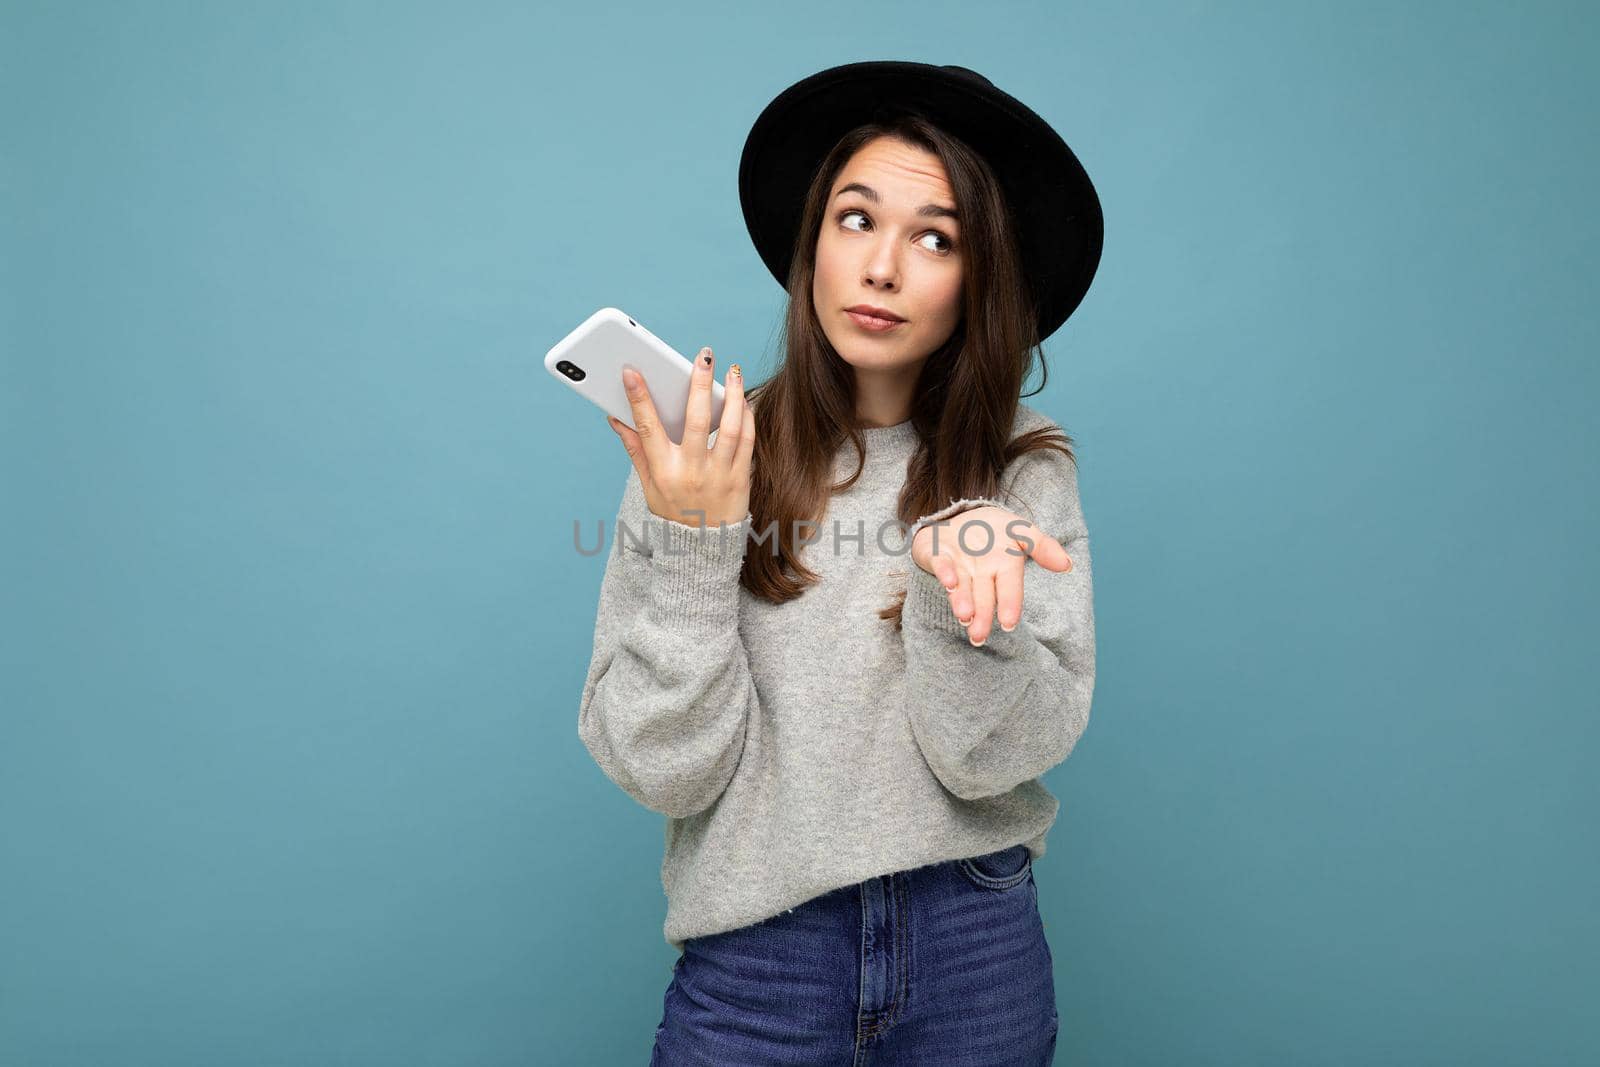 young asking dissatisfied brunette woman pointing hand at you wearing black hat and grey sweater holding smartphone looking to the side isolated on background.